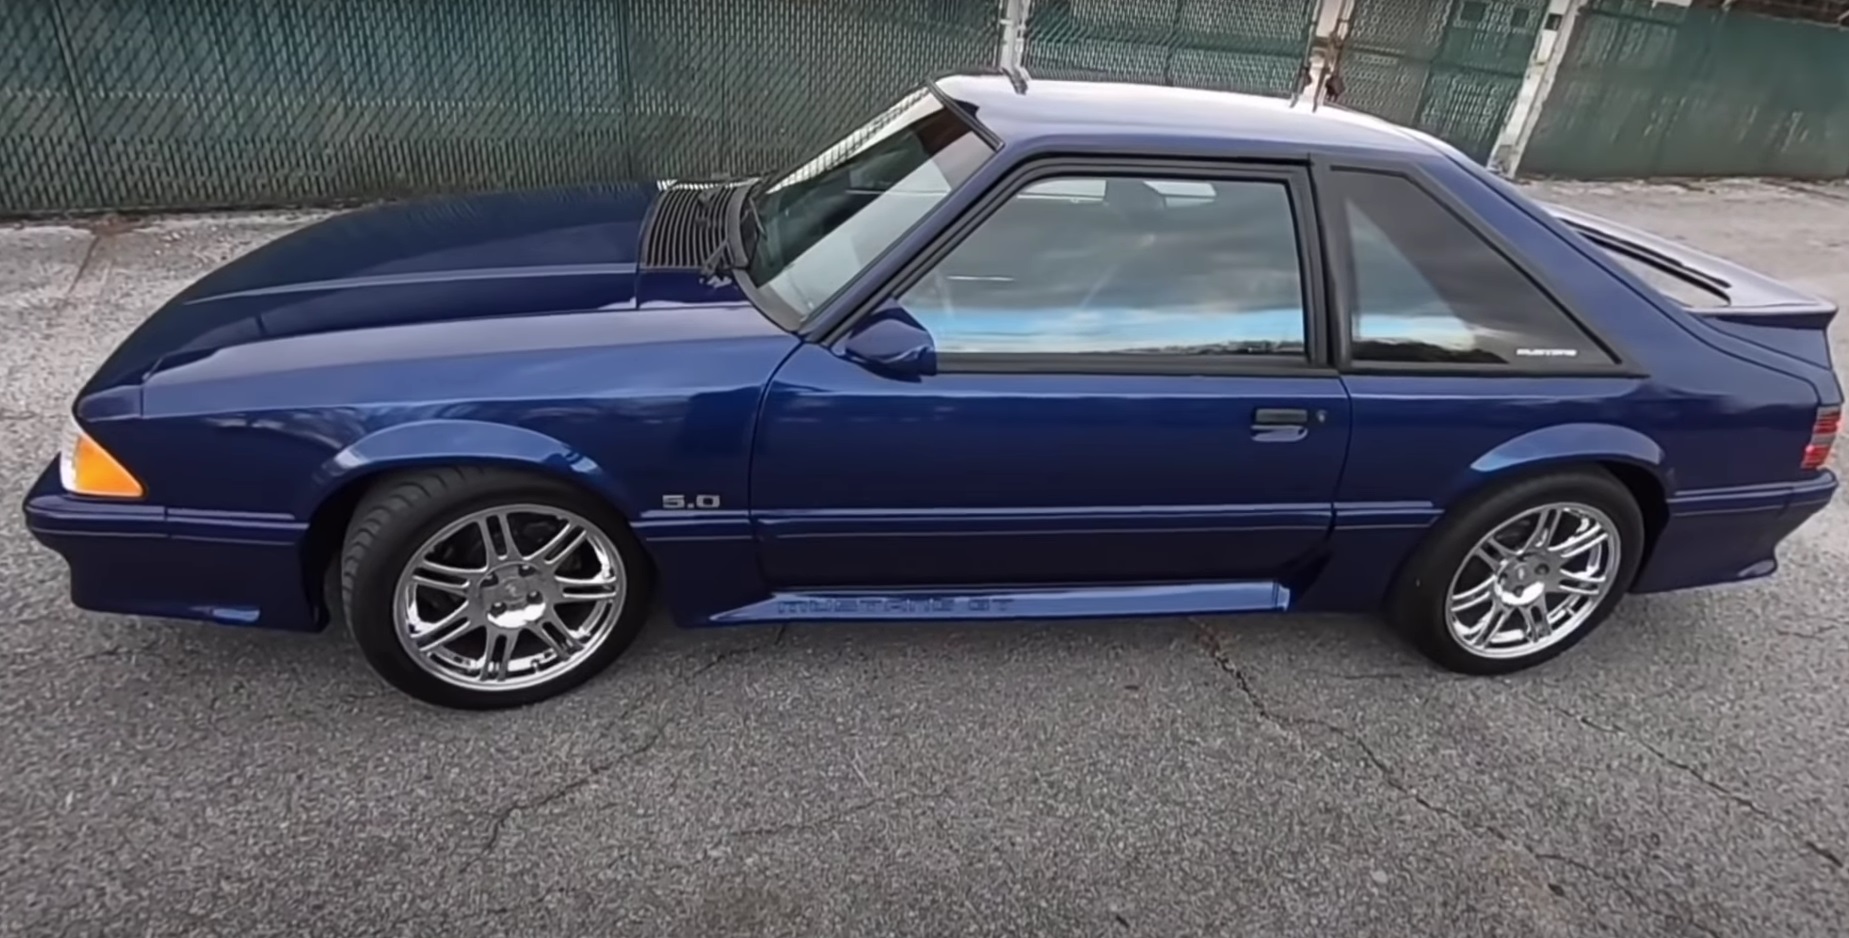 Video: 1989 Ford Mustang GT Test Drive